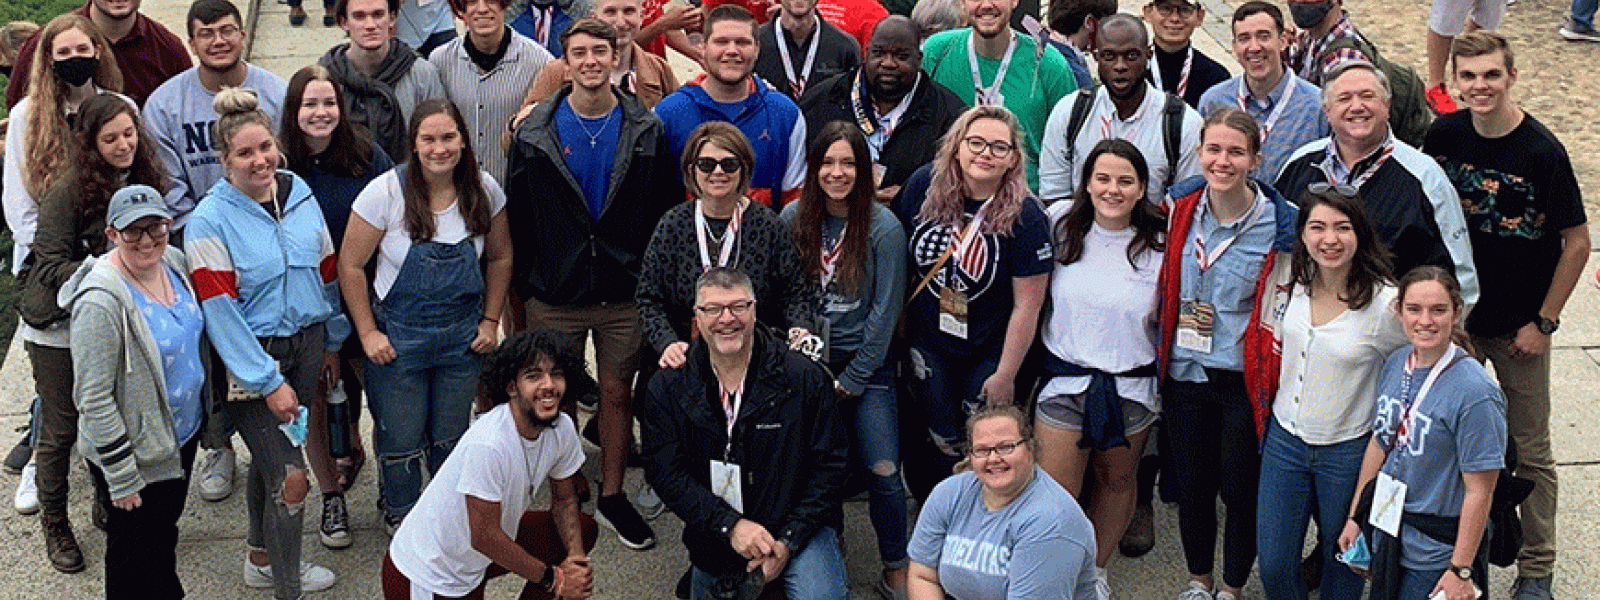 CIU students and administrators joined tens of thousands of others on the National Mall for prayer.